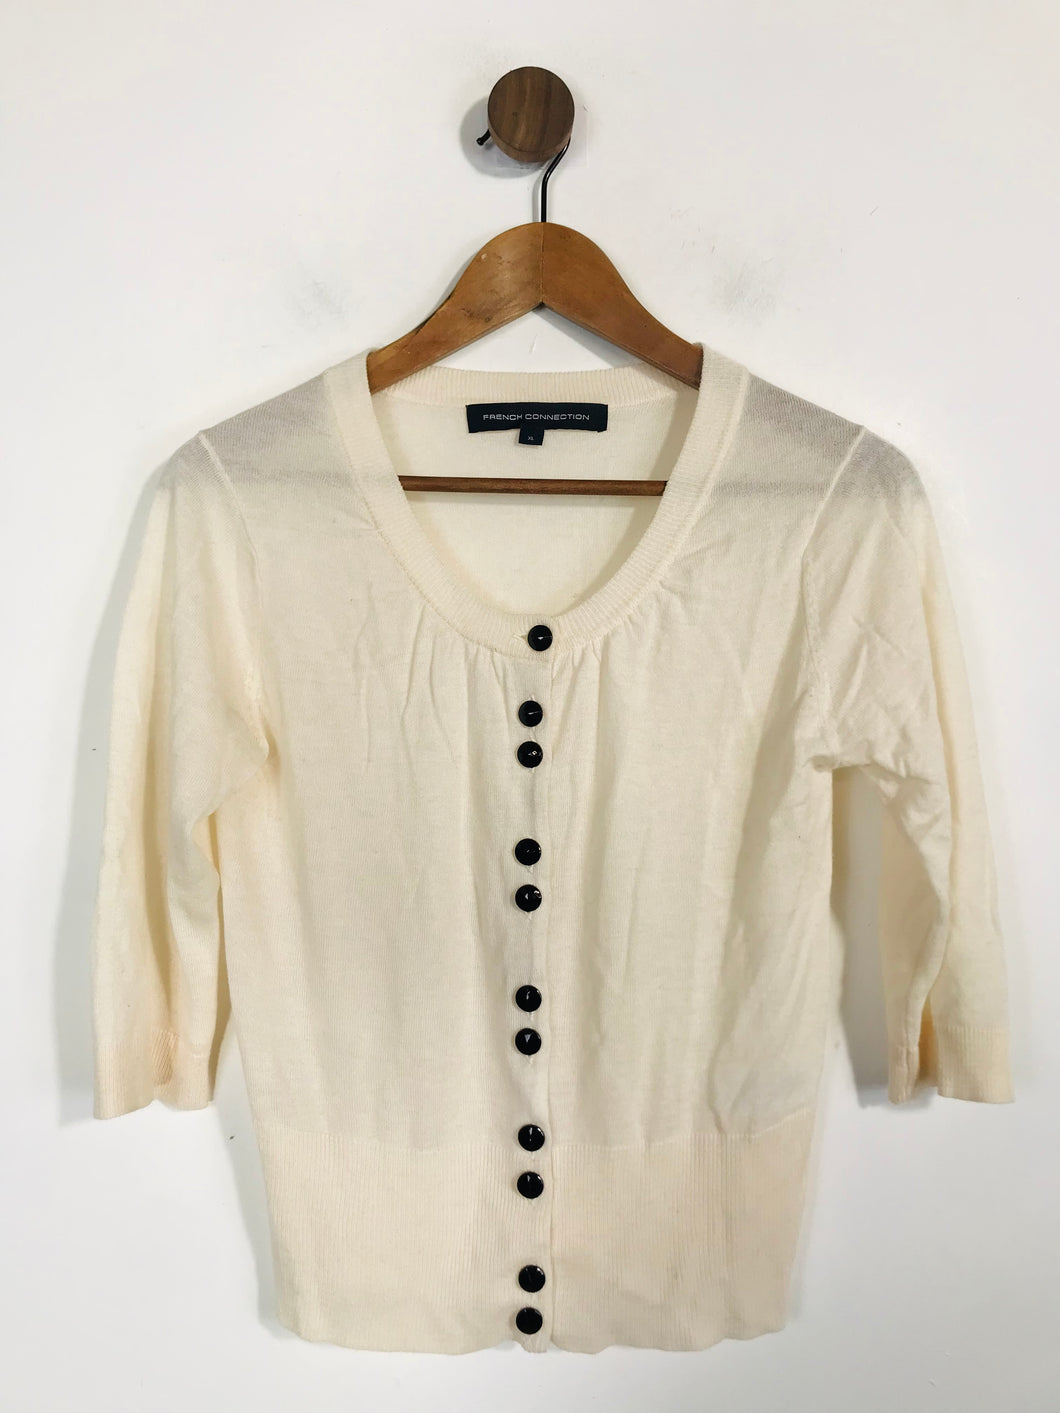 French Connection Women's Cardigan | XL UK16 | Beige